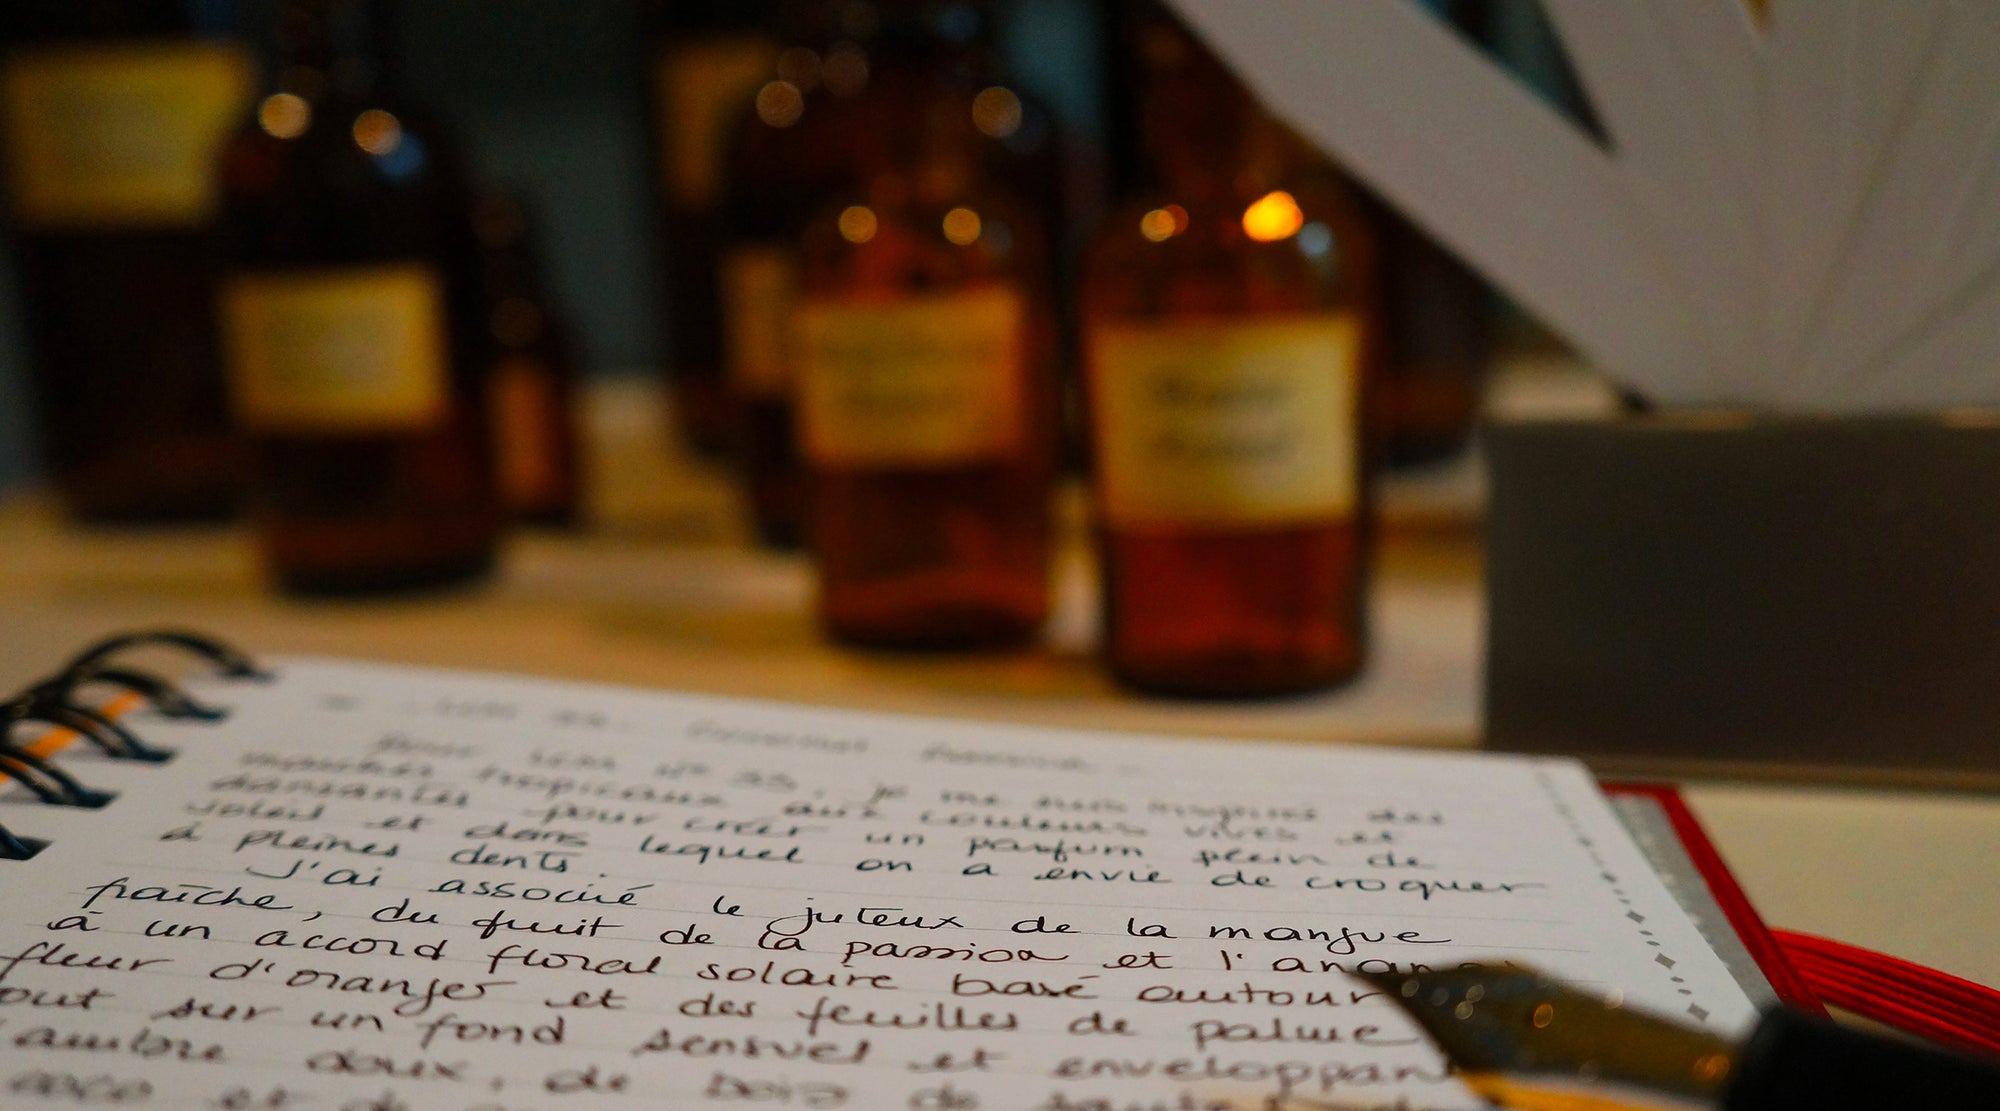 perfumer's notebook with handwritten notes in french and perfume bottles and blotters in background